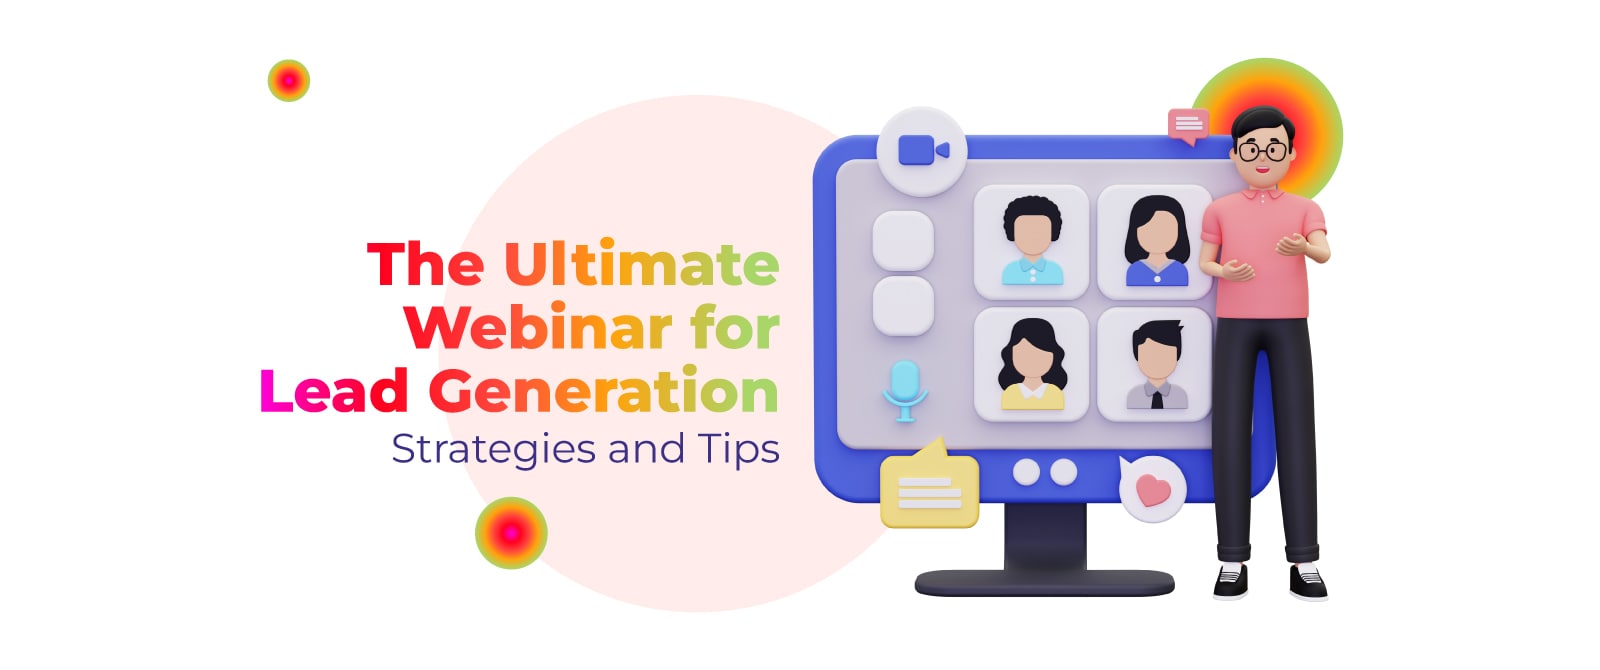 The Ultimate Webinar for Lead Generation: Strategies and Tips